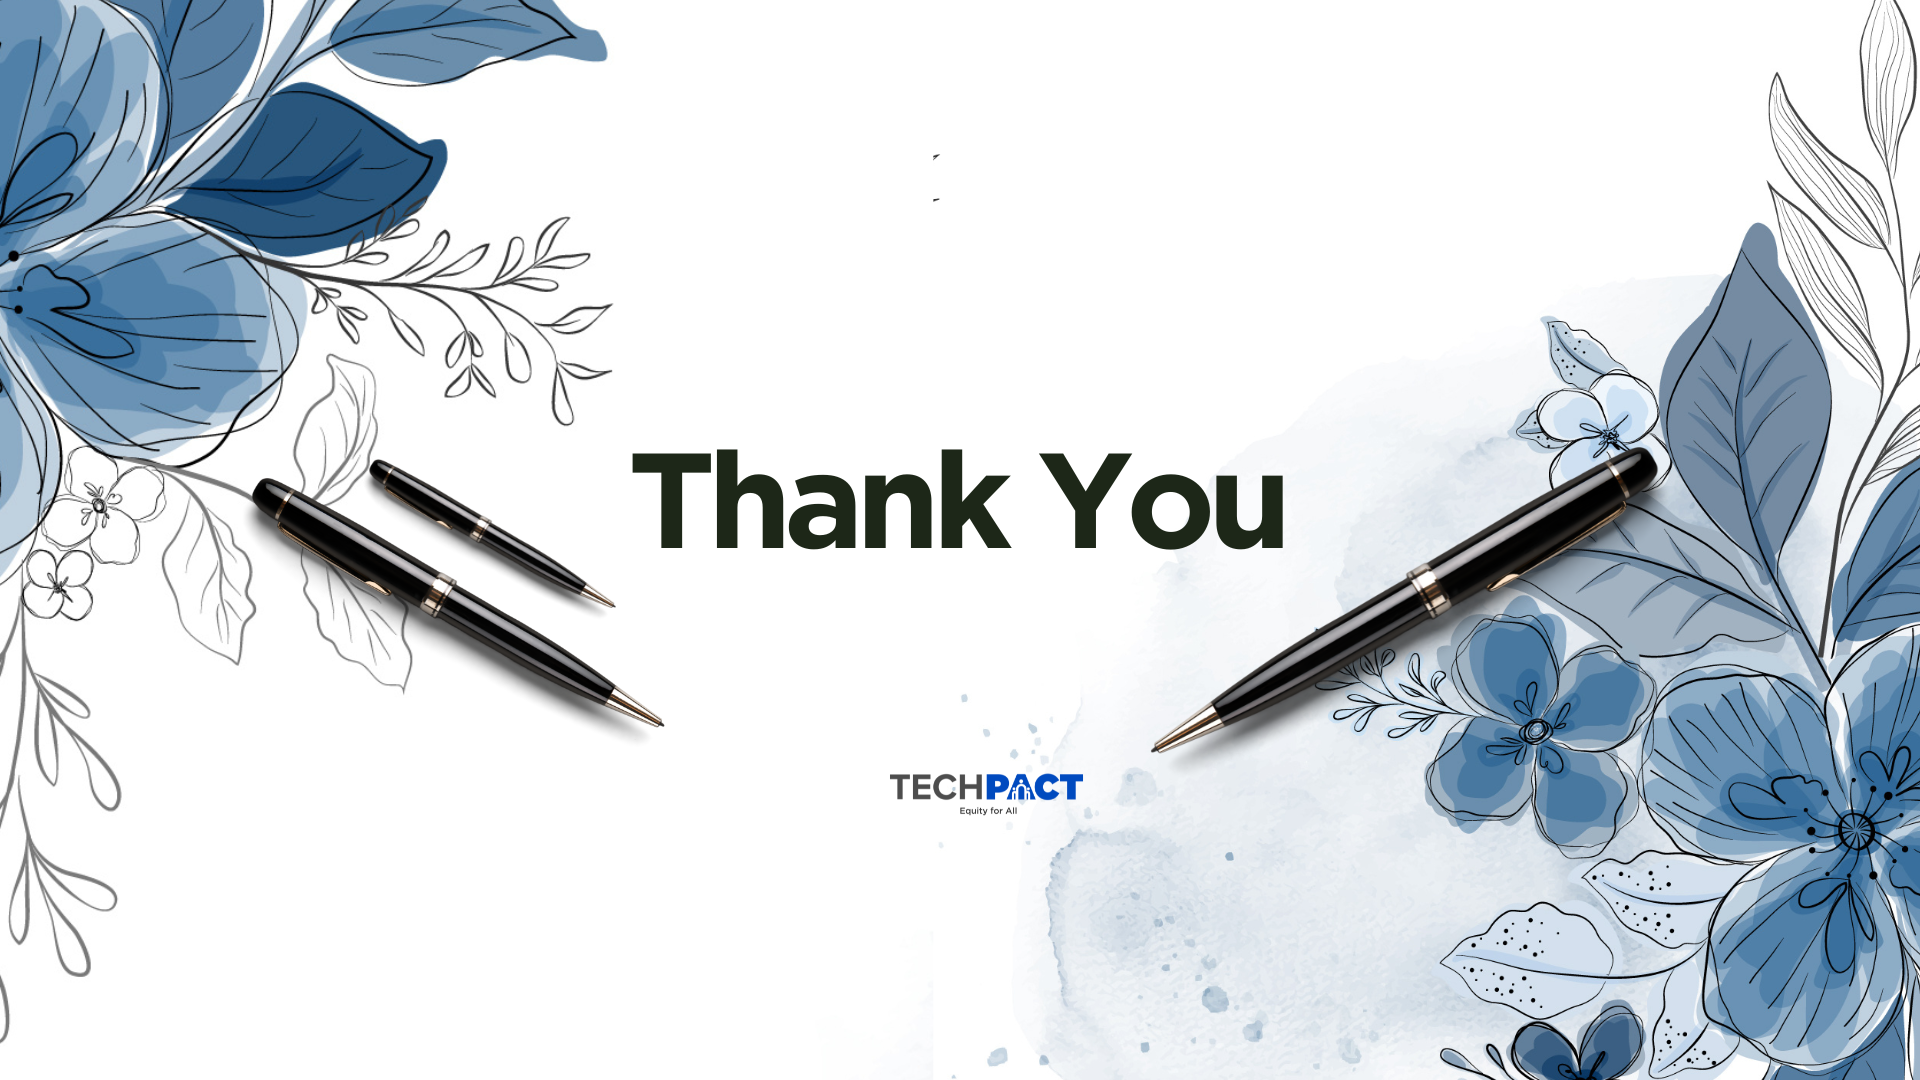 An image of flowres and pens to express gratitude